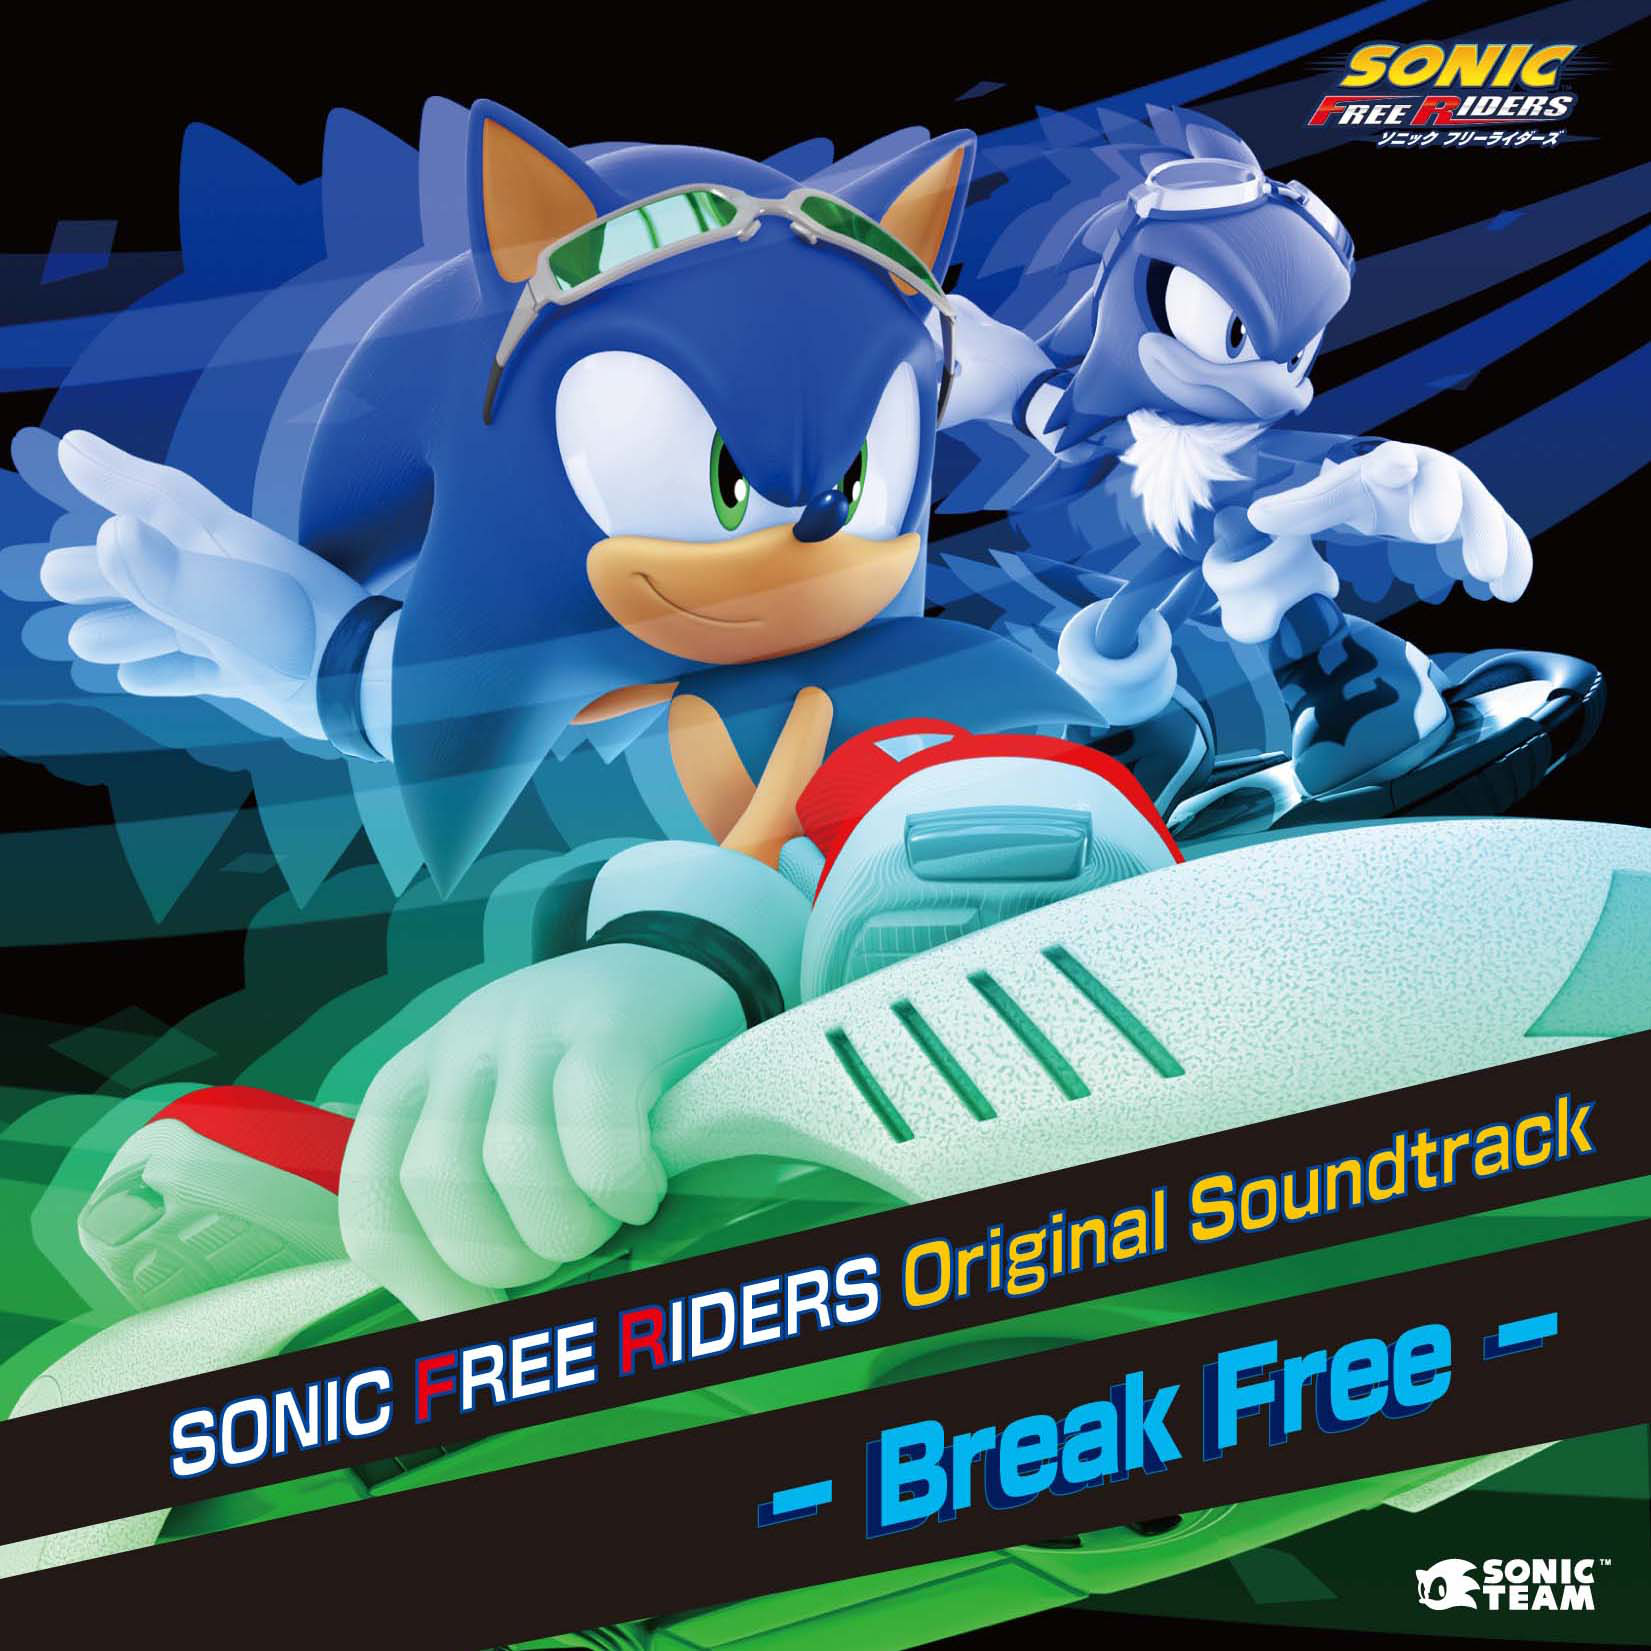 download shadow sonic free riders for free